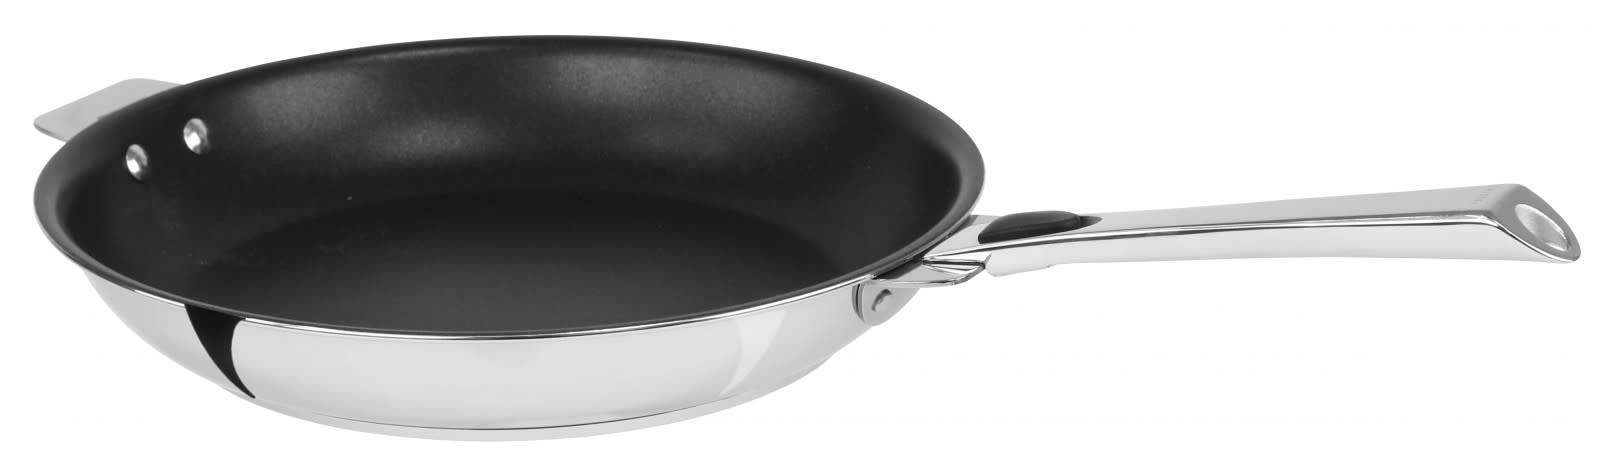 Stainless Steel Frying Pan - Exceliss Casteline Non-Stick 24 cm-2